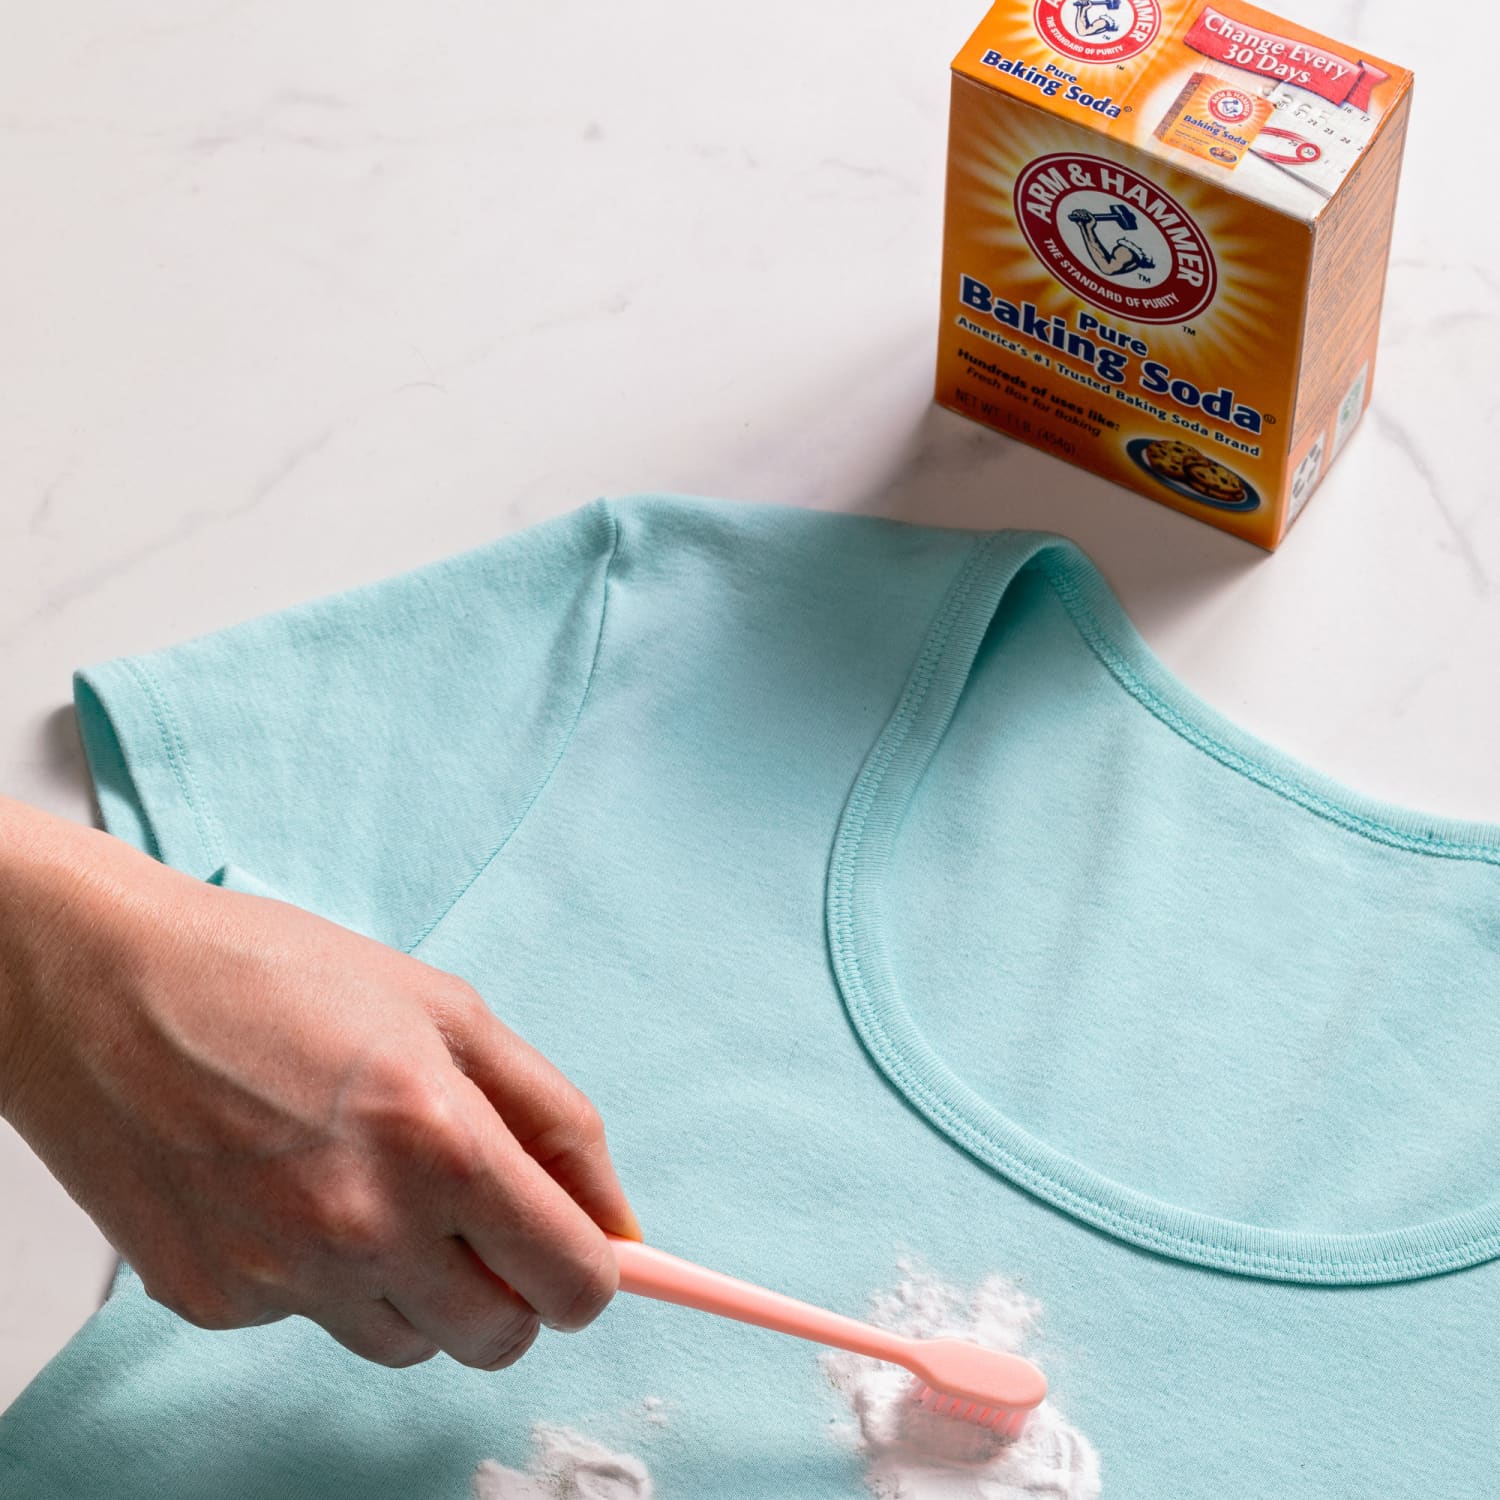 Removing Bleach Stains from Clothing - Easy DIY Guide